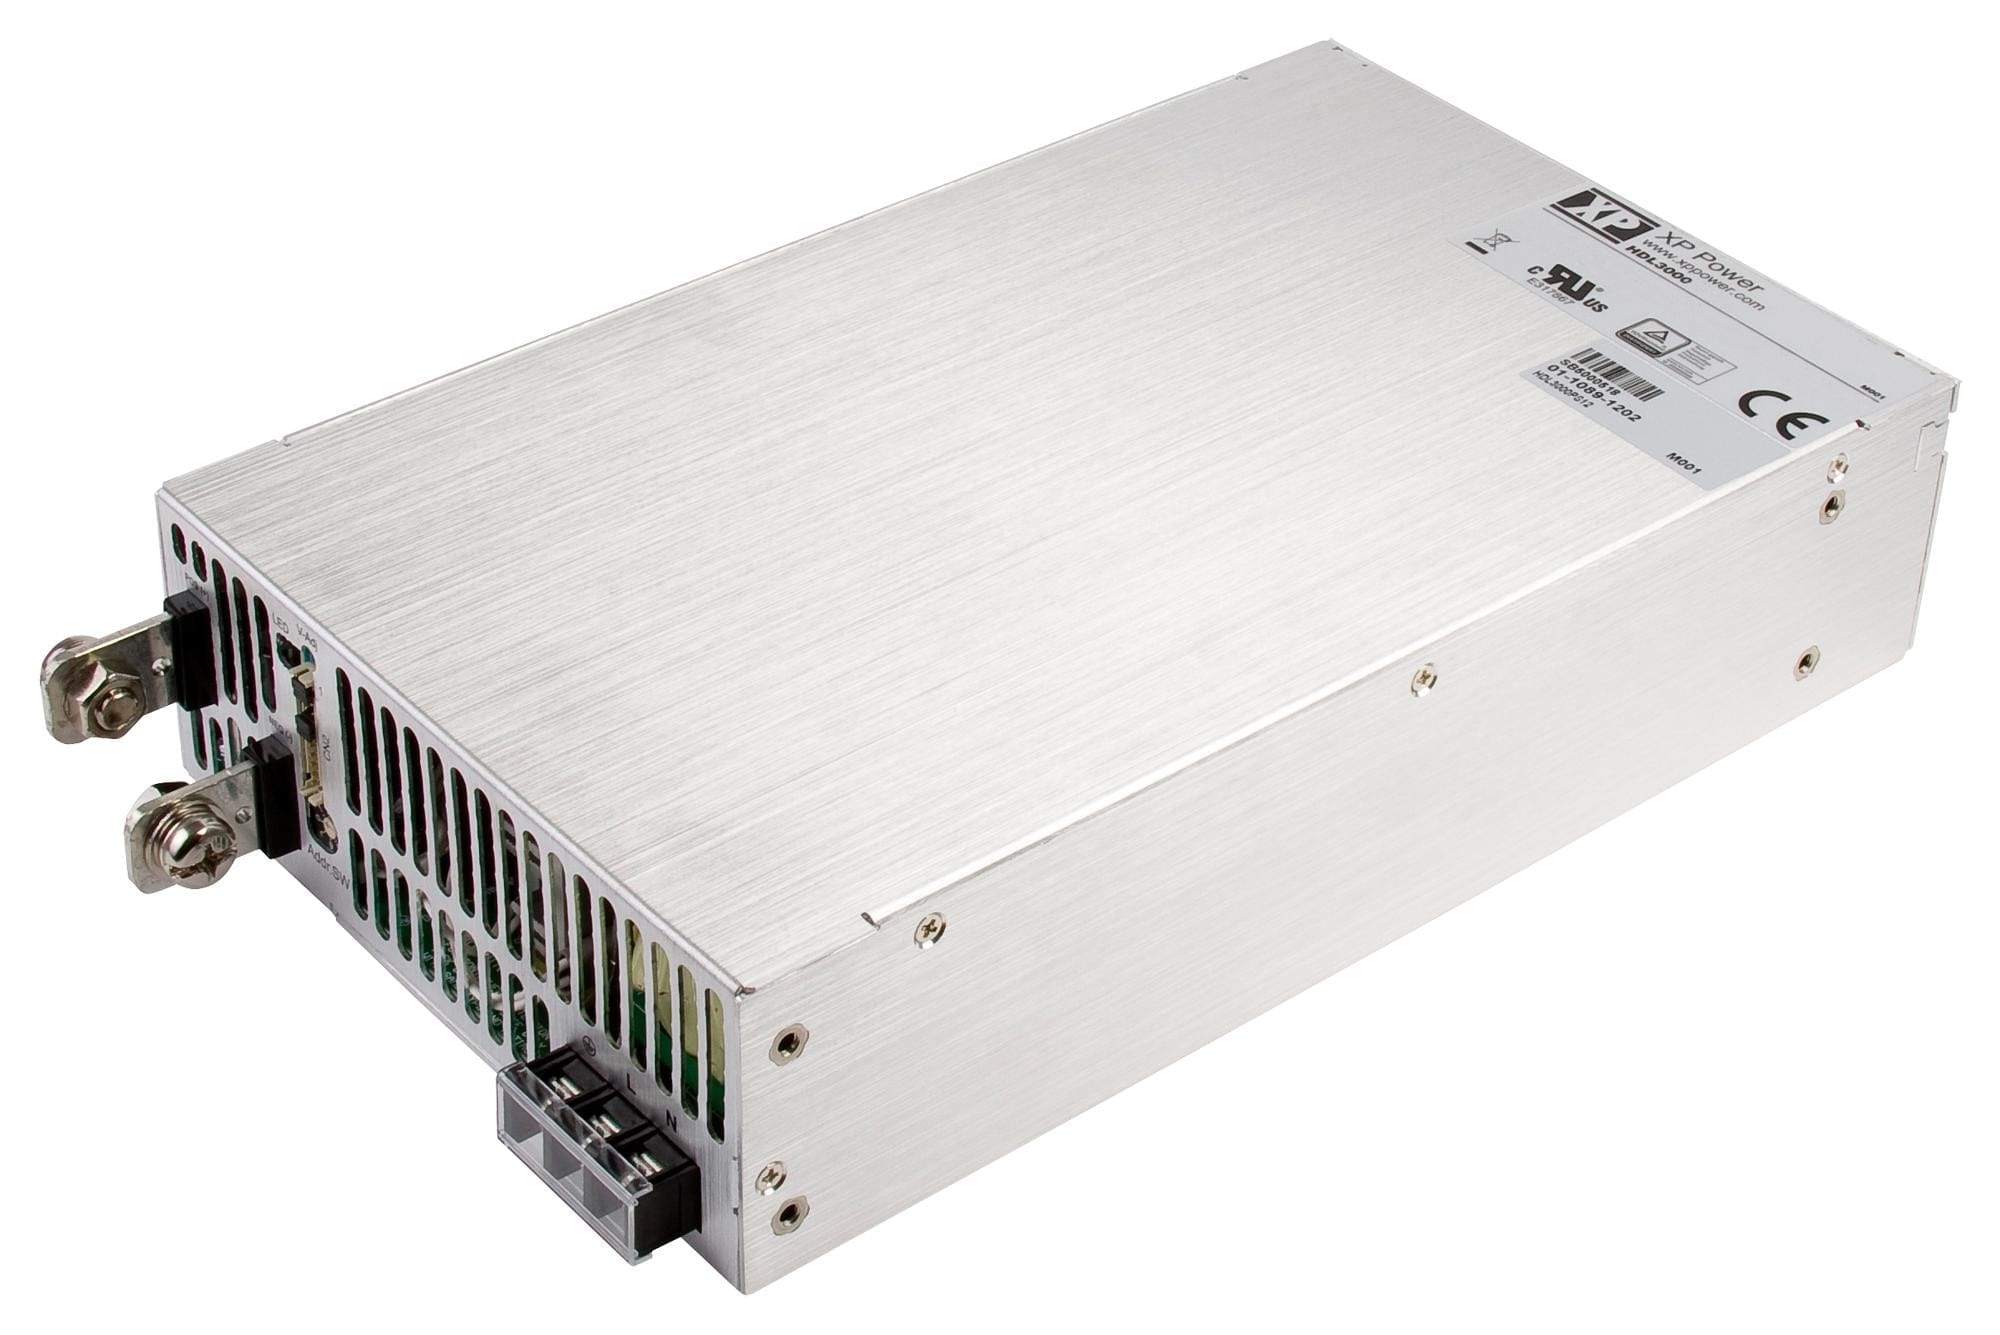 XP POWER Enclosed - Single Output HDL3000PS15 POWER SUPPLY, AC-DC, 15V, 160A XP POWER 3524106 HDL3000PS15